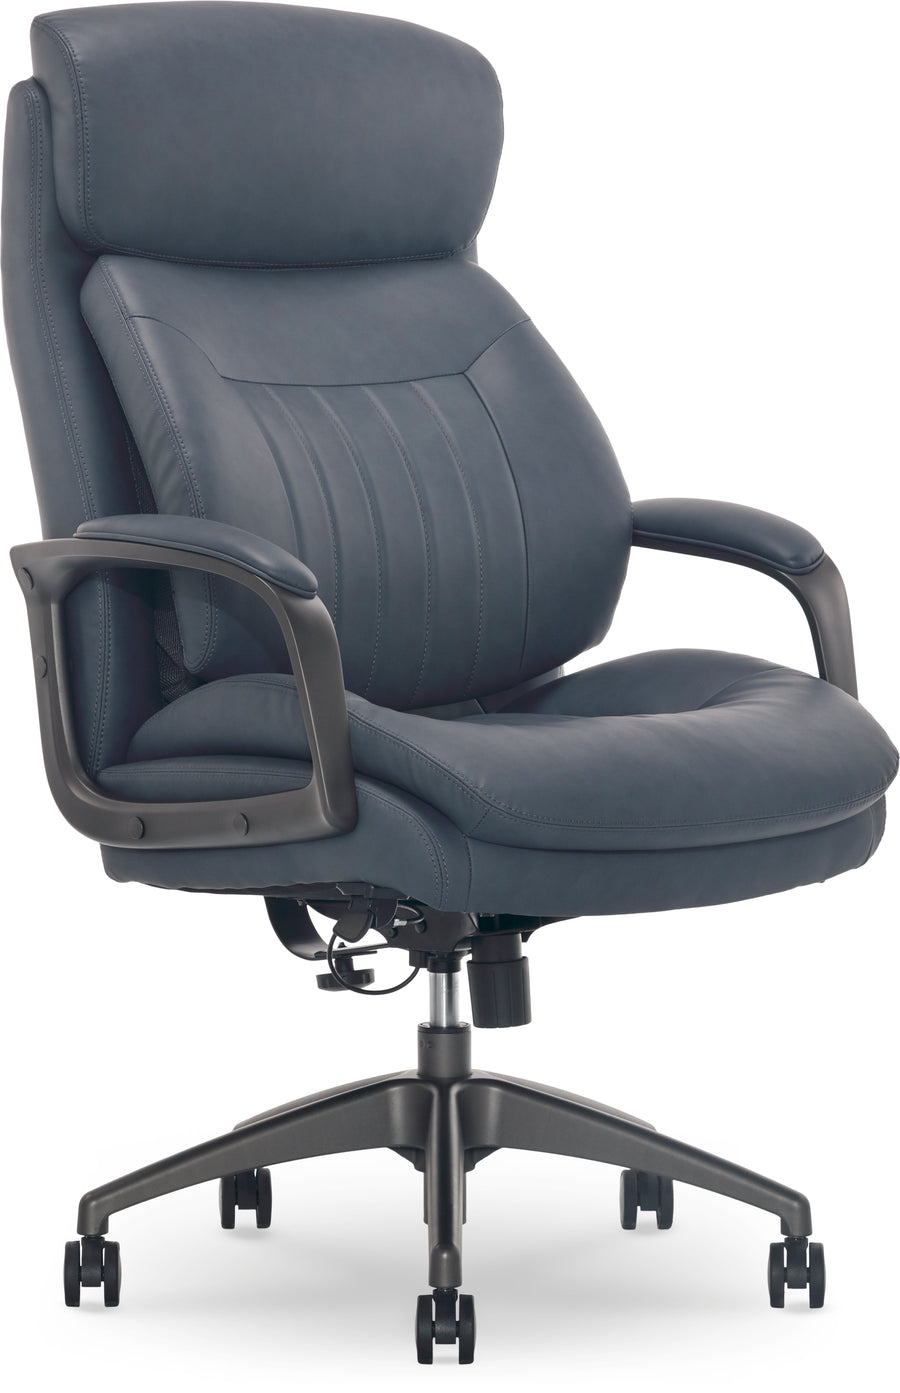 La-Z-Boy - Calix Big and Tall Executive Chair with TrueWellness Technology Office Chair - Slate_0